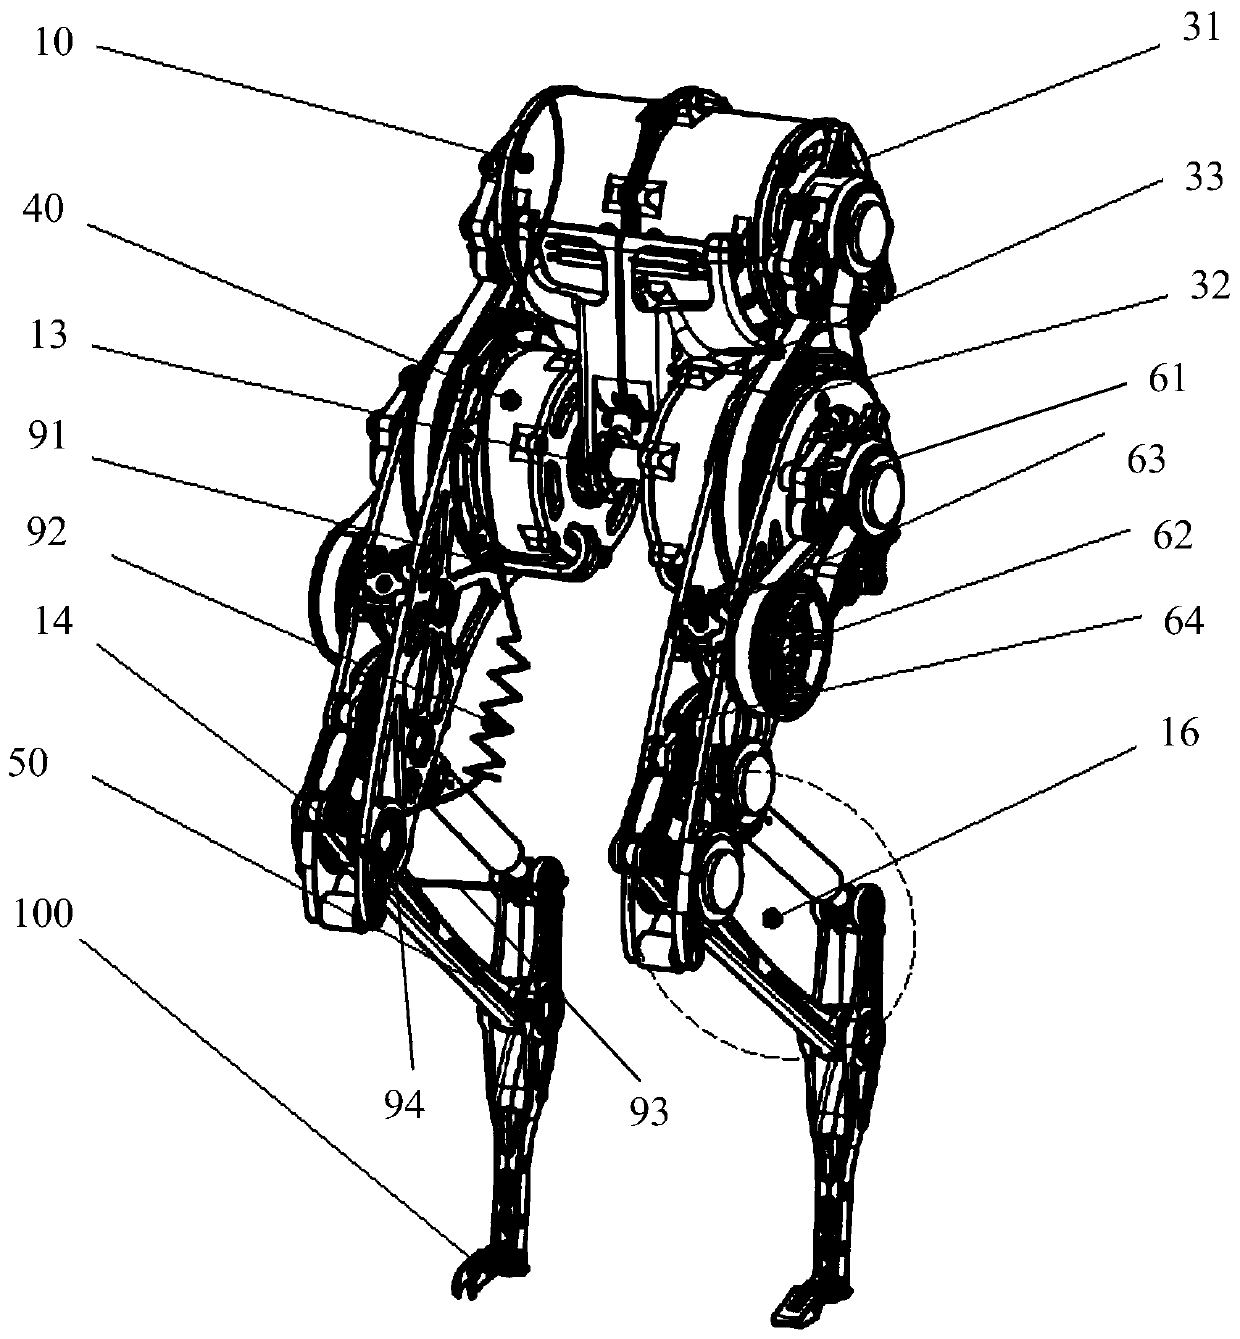 Expectant-direct-driven leg-foot super-dynamic robot based on multi-joint coupling